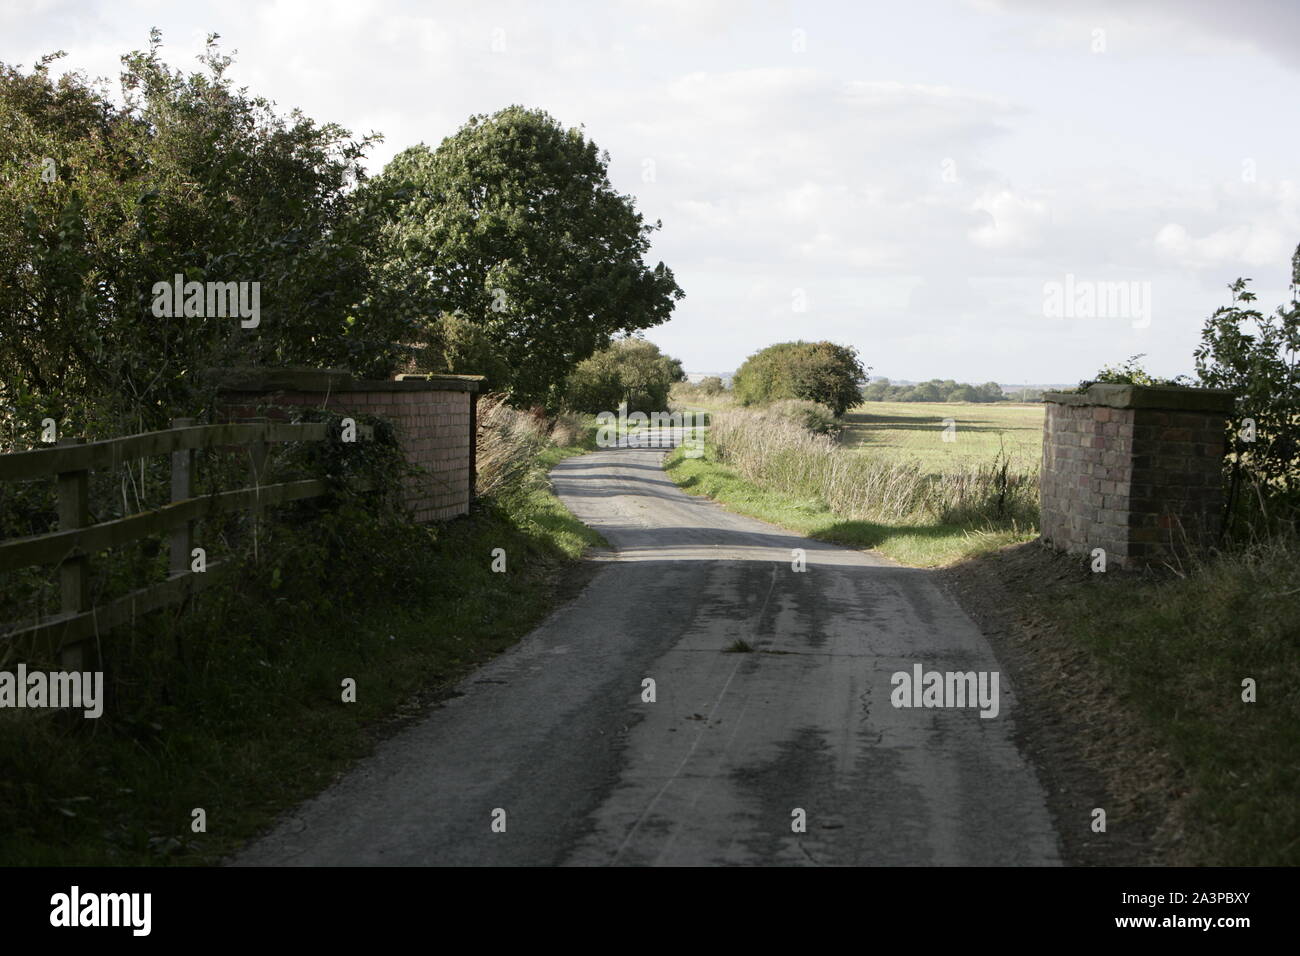 Narrow Rural Country Road with Wooden Stock Fencing and Old Brick Bridge Stock Photo